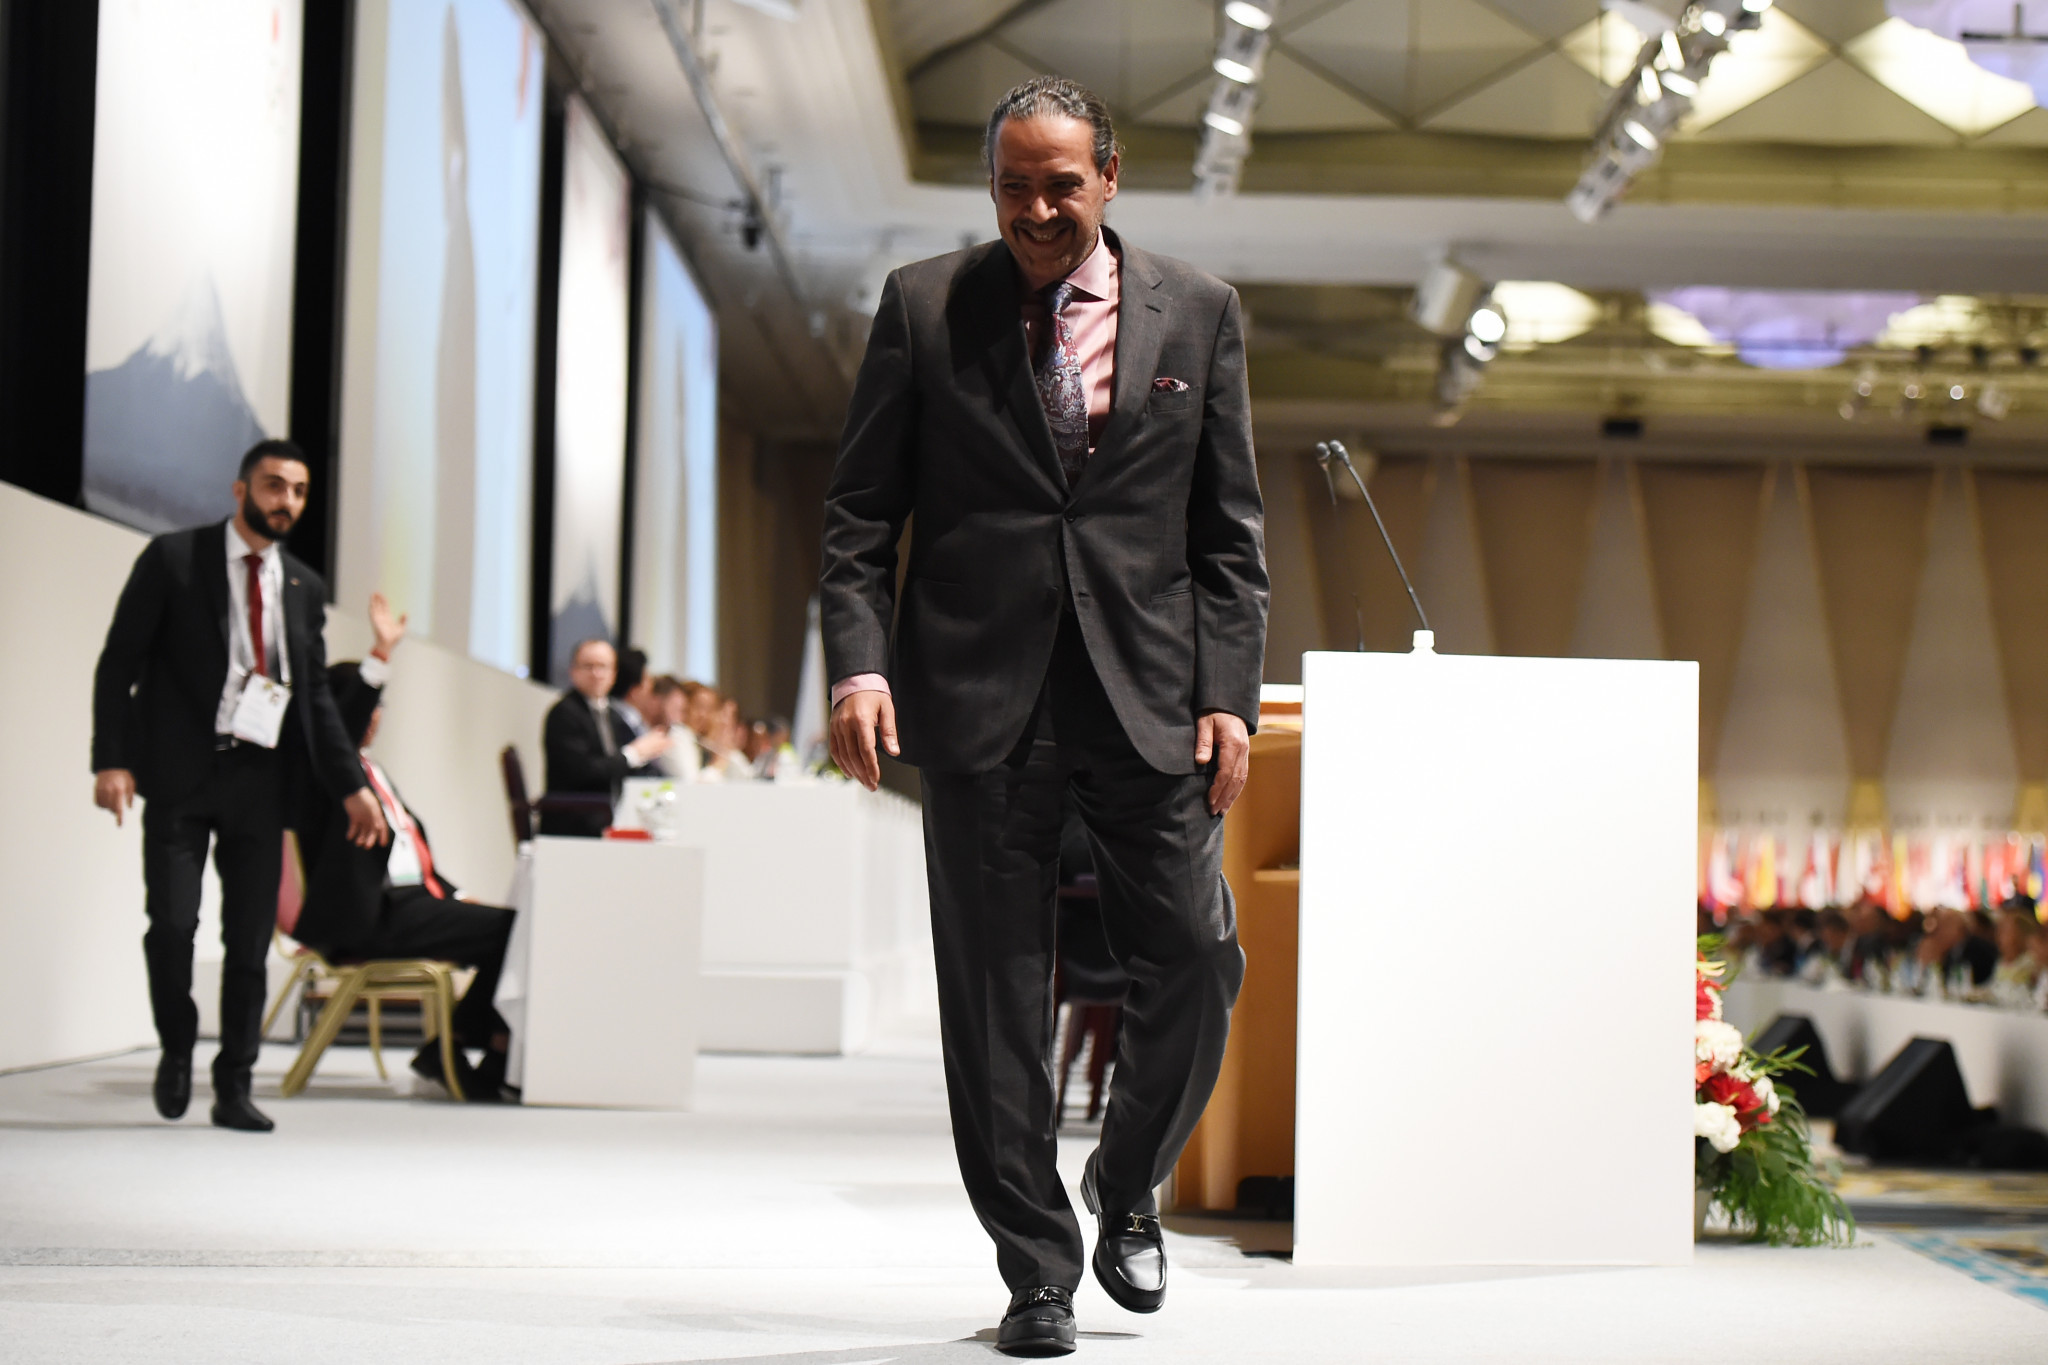 Sheikh Ahmad steps aside as ANOC President on opening day of General Assembly